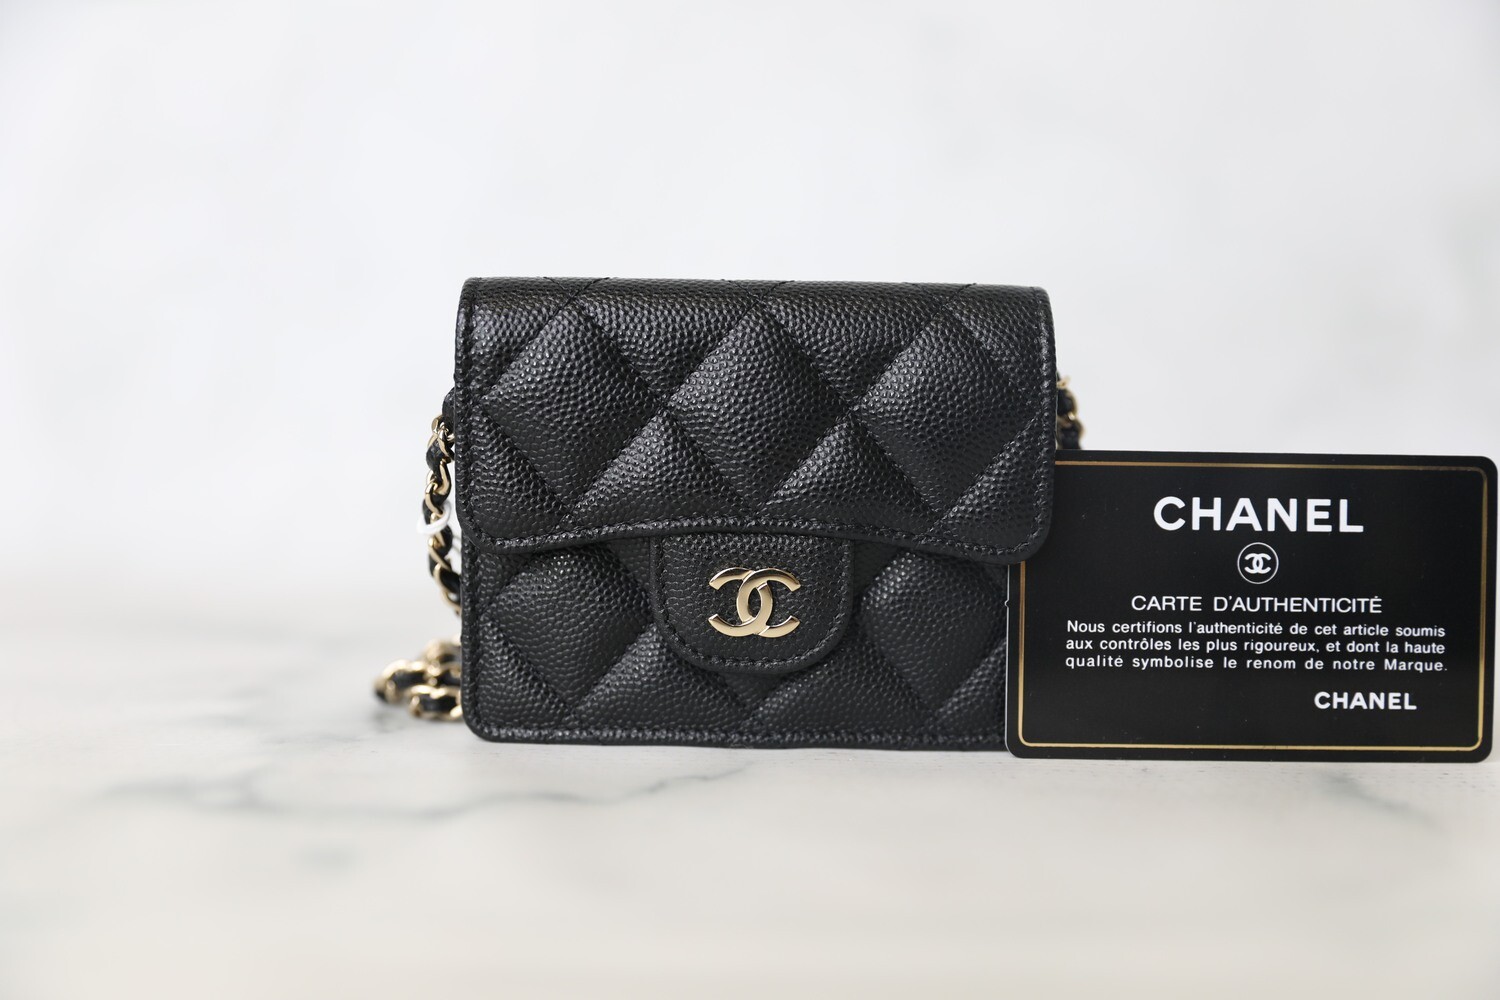 Chanel Vanity With Chain Small, Black Caviar with Gold Hardware, New in Box  WA001